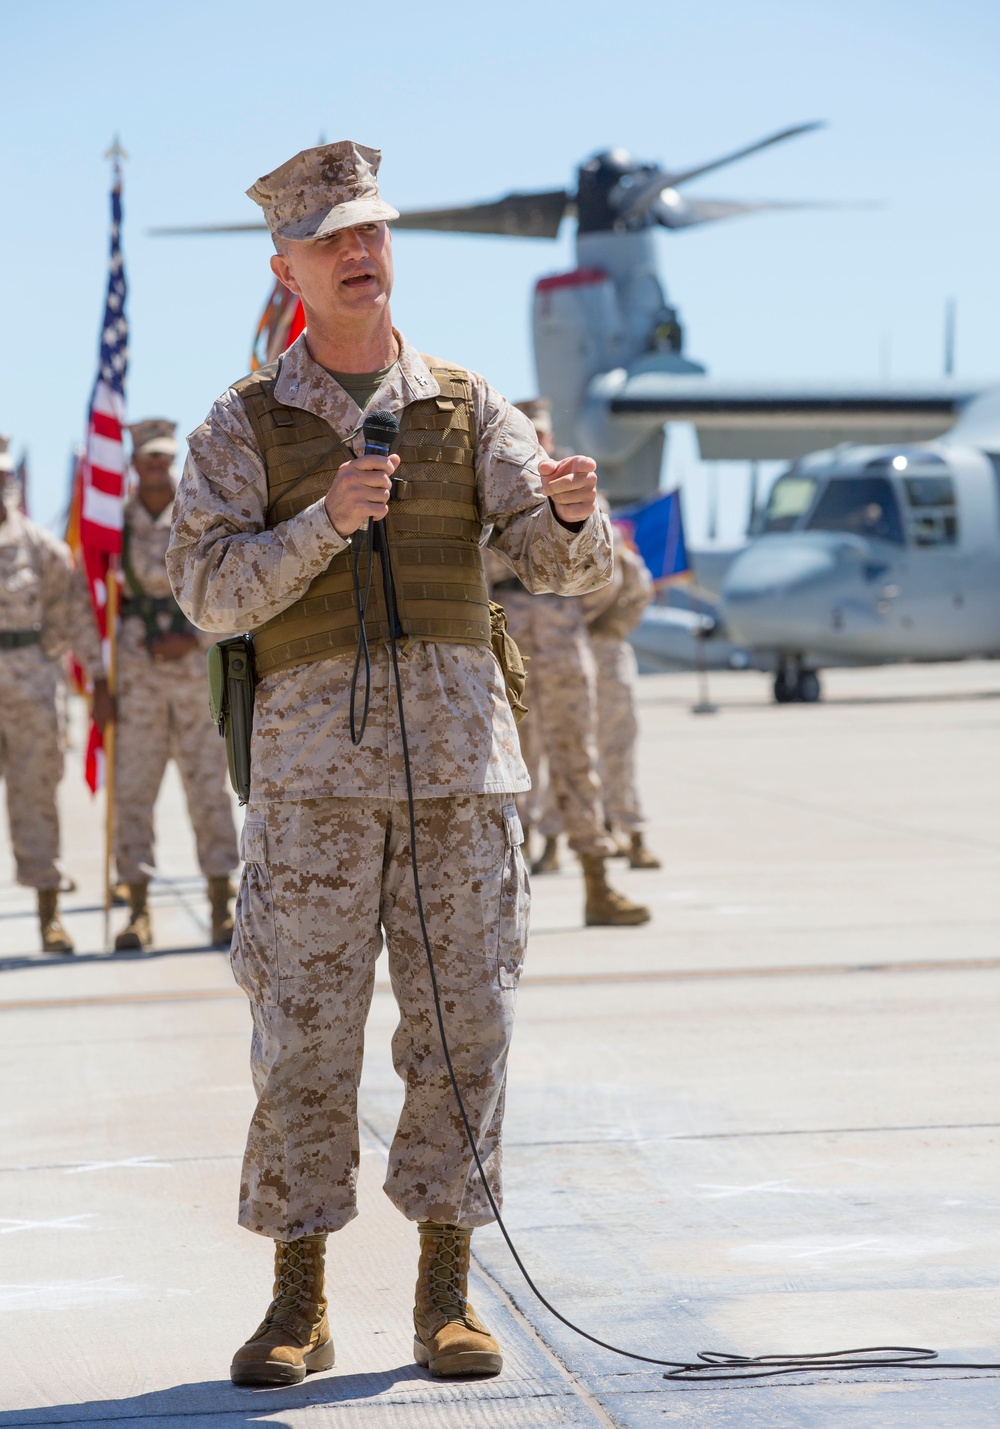 MAG-16 welcomes new commanding officer